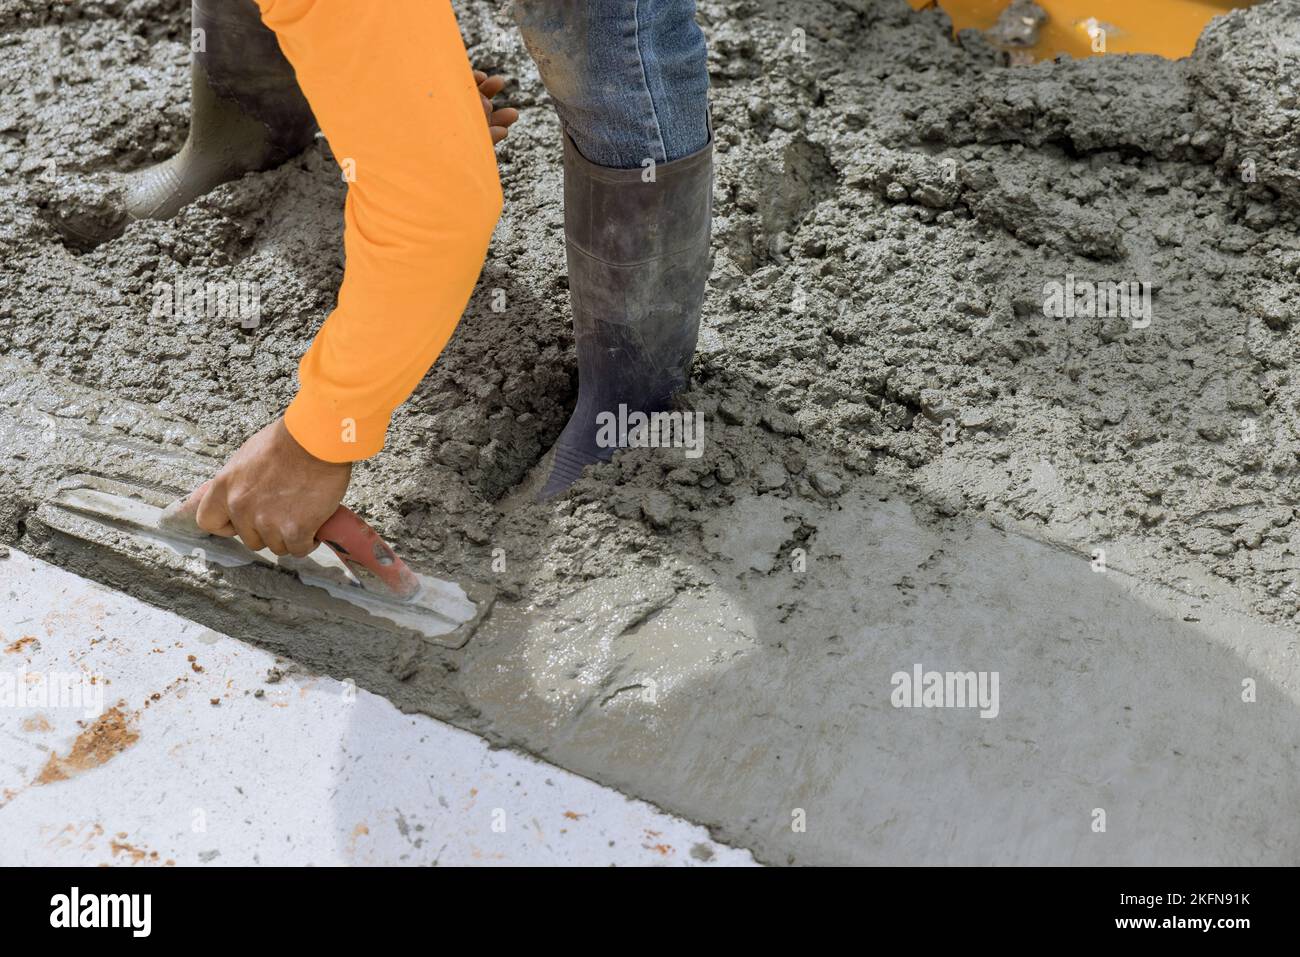 An employee is holding steel trowel as he smooths leveling over freshly poured concrete sidewalk in construction zone Stock Photo